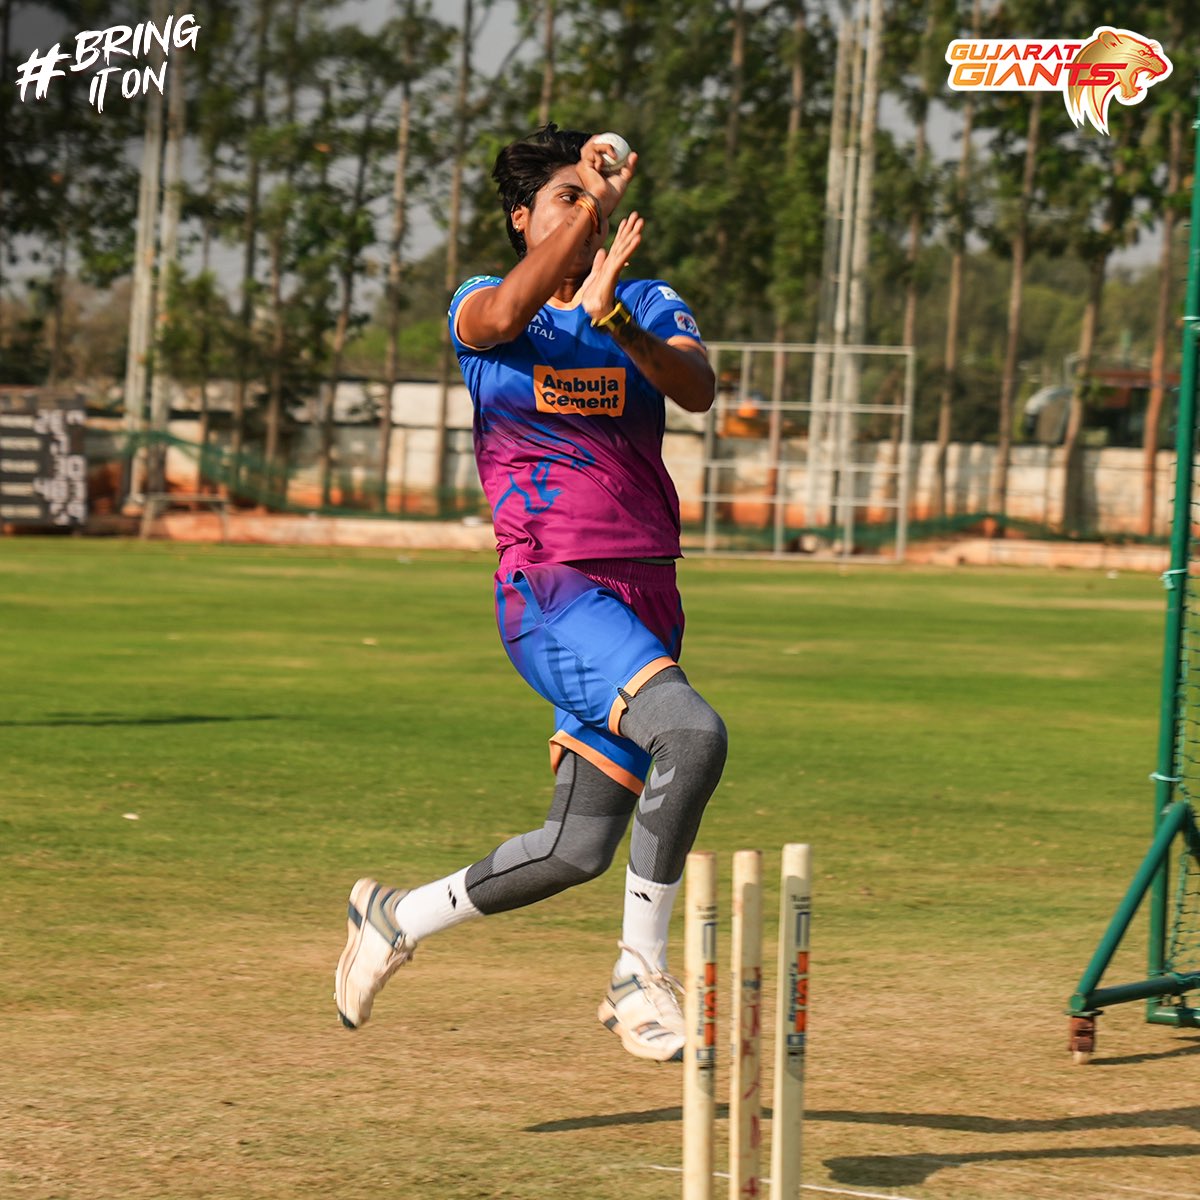 #GiantArmy, guess the bowler in the comments! 👀 #BringItOn #GujaratGiants #Adani